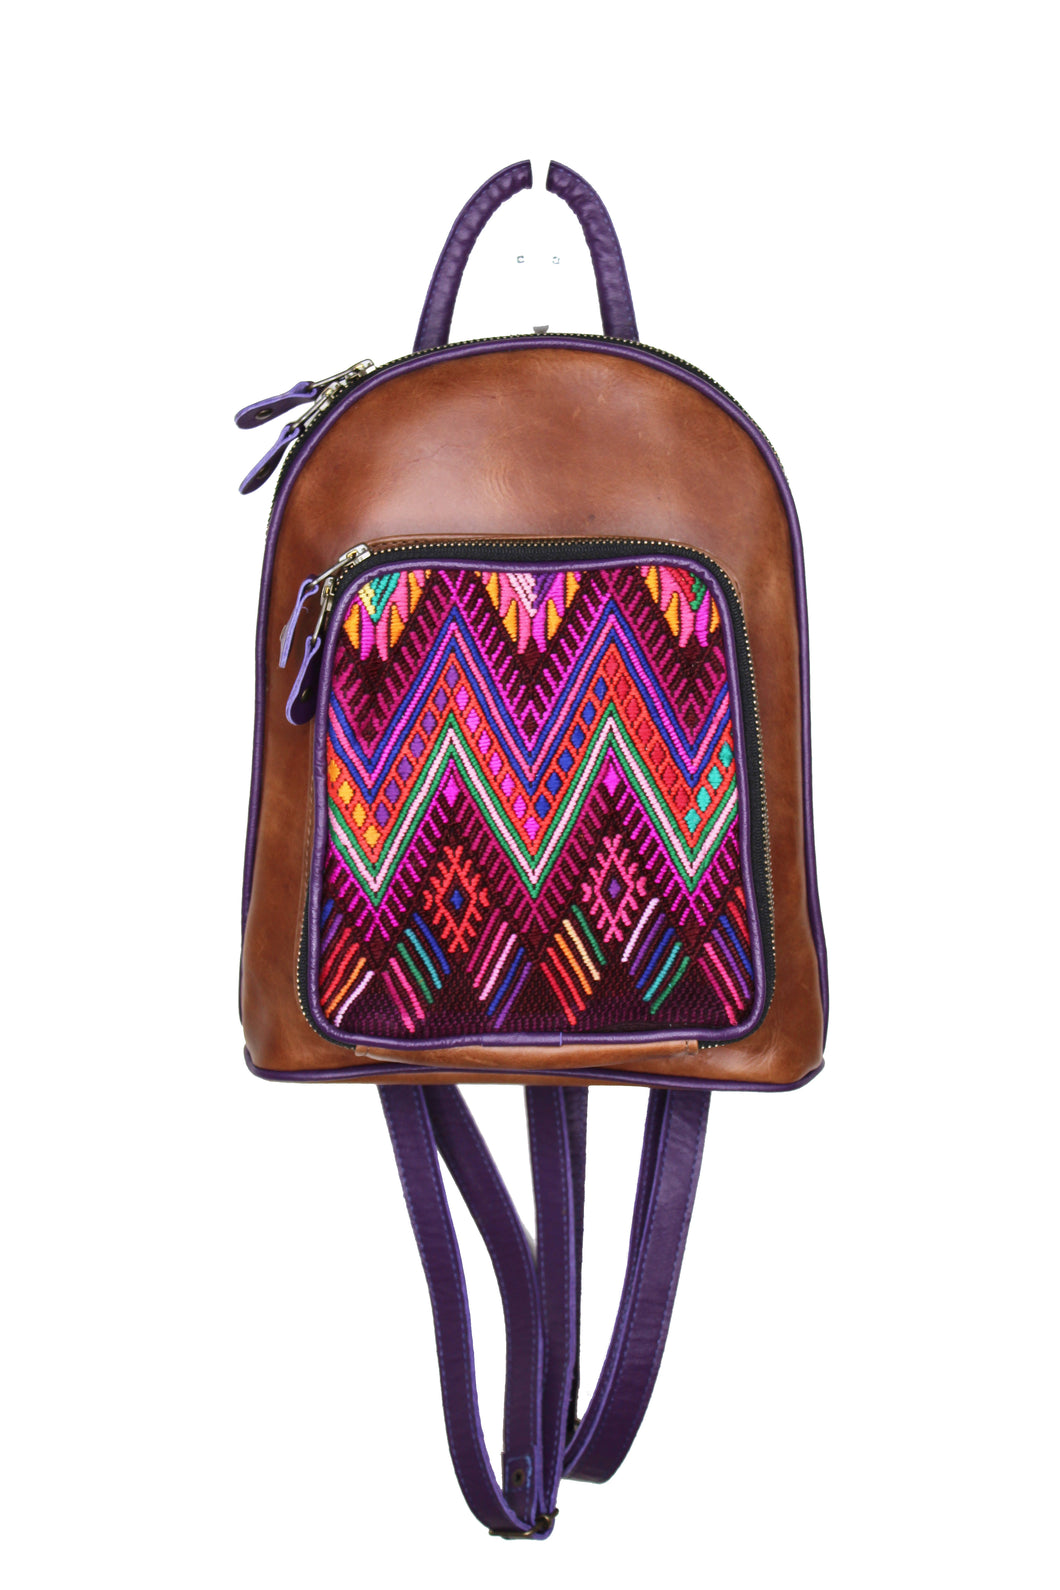 Petite small cute backpack purse in a medium tan leather and purple leather straps and accent. It has double zipper openings. Front pocket has storage for pens and credit cards. Main compartment has two open pockets and a zipper pocket.